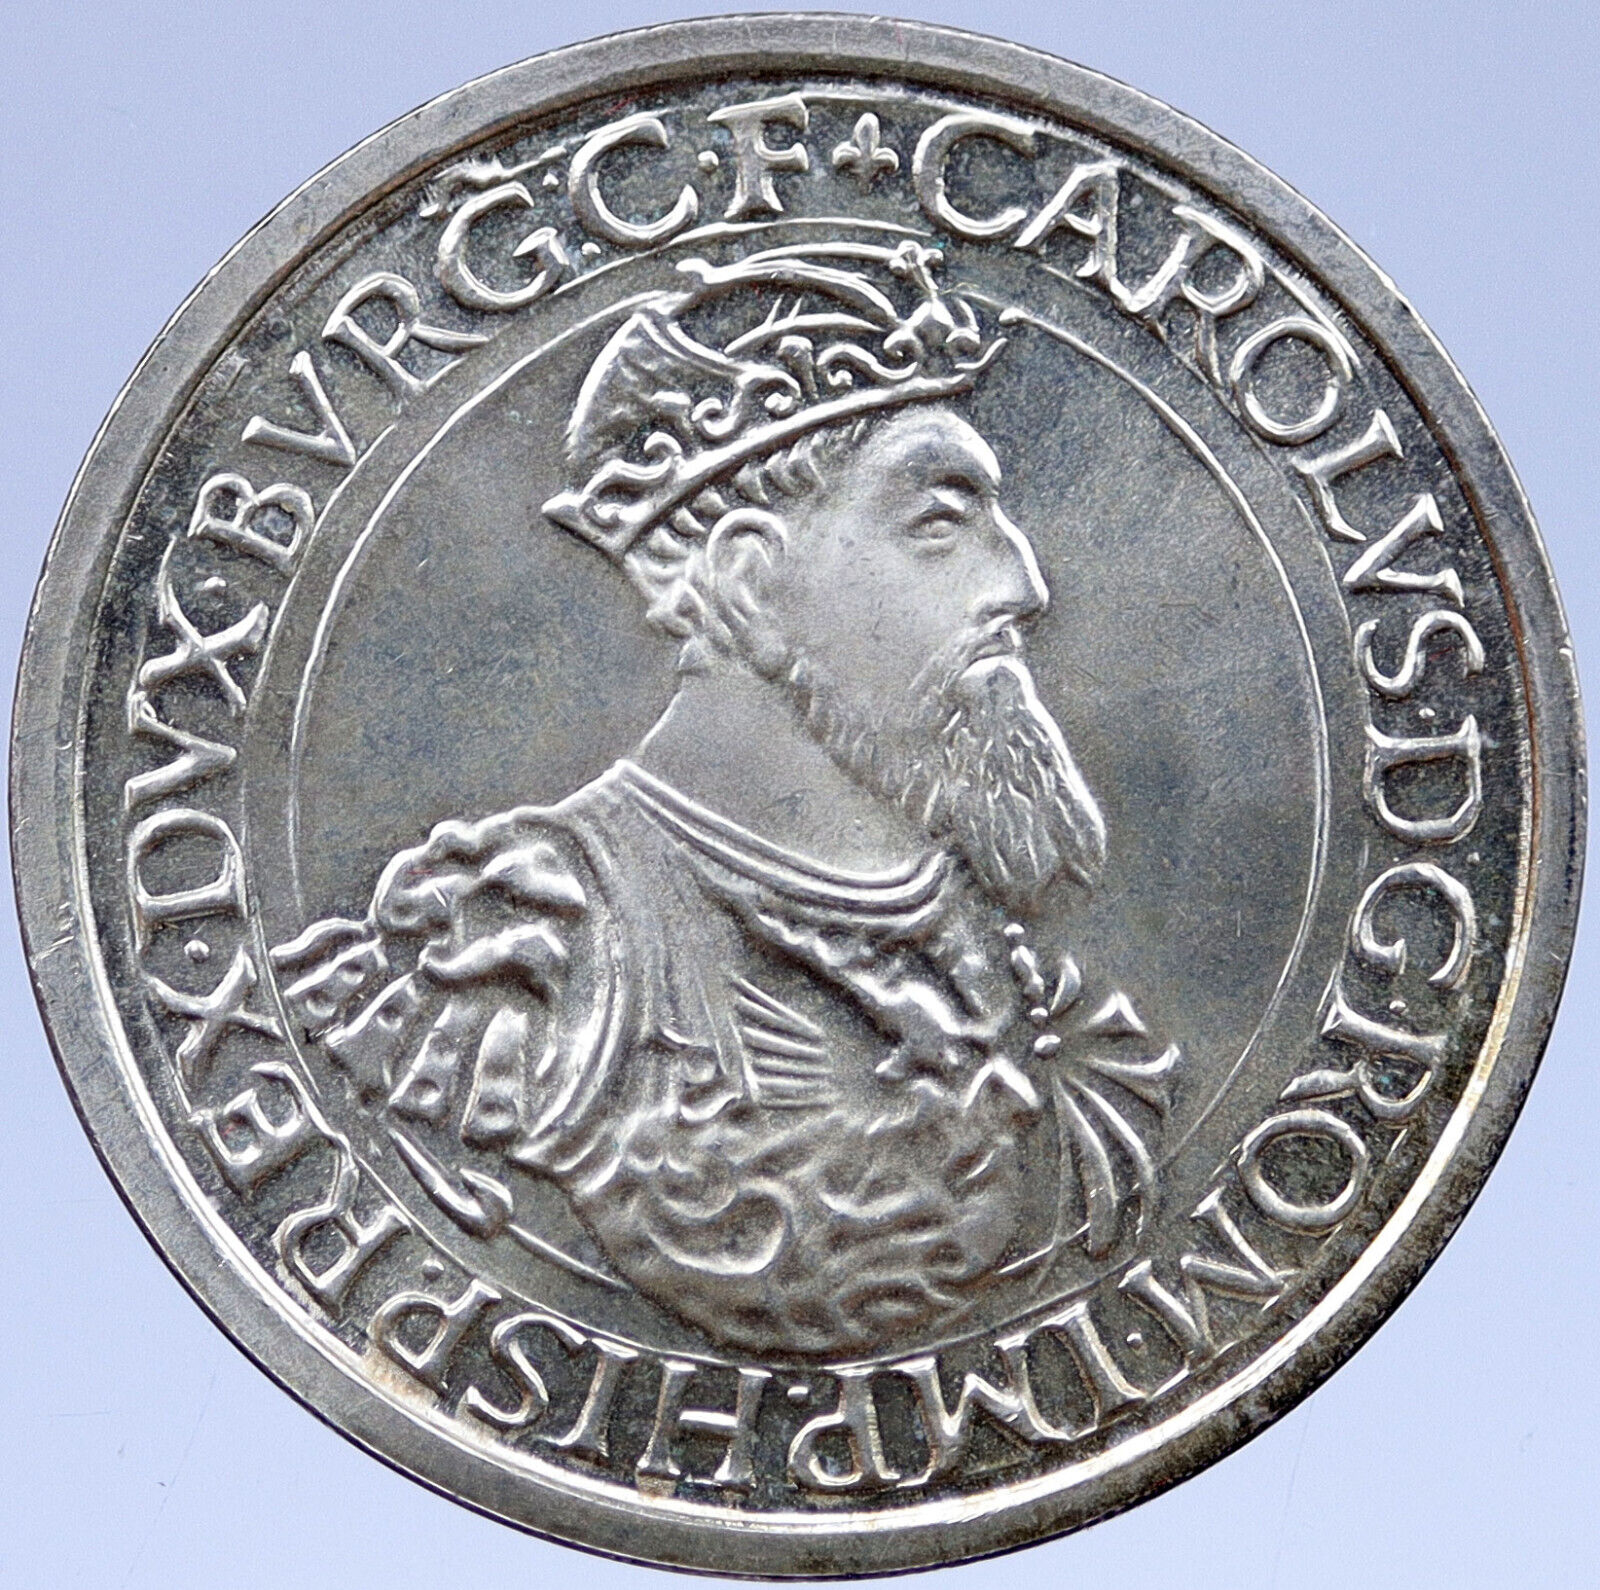 1987 BELGIUM European Treaties of Rome Large SILVER Coin King Charles V i119408